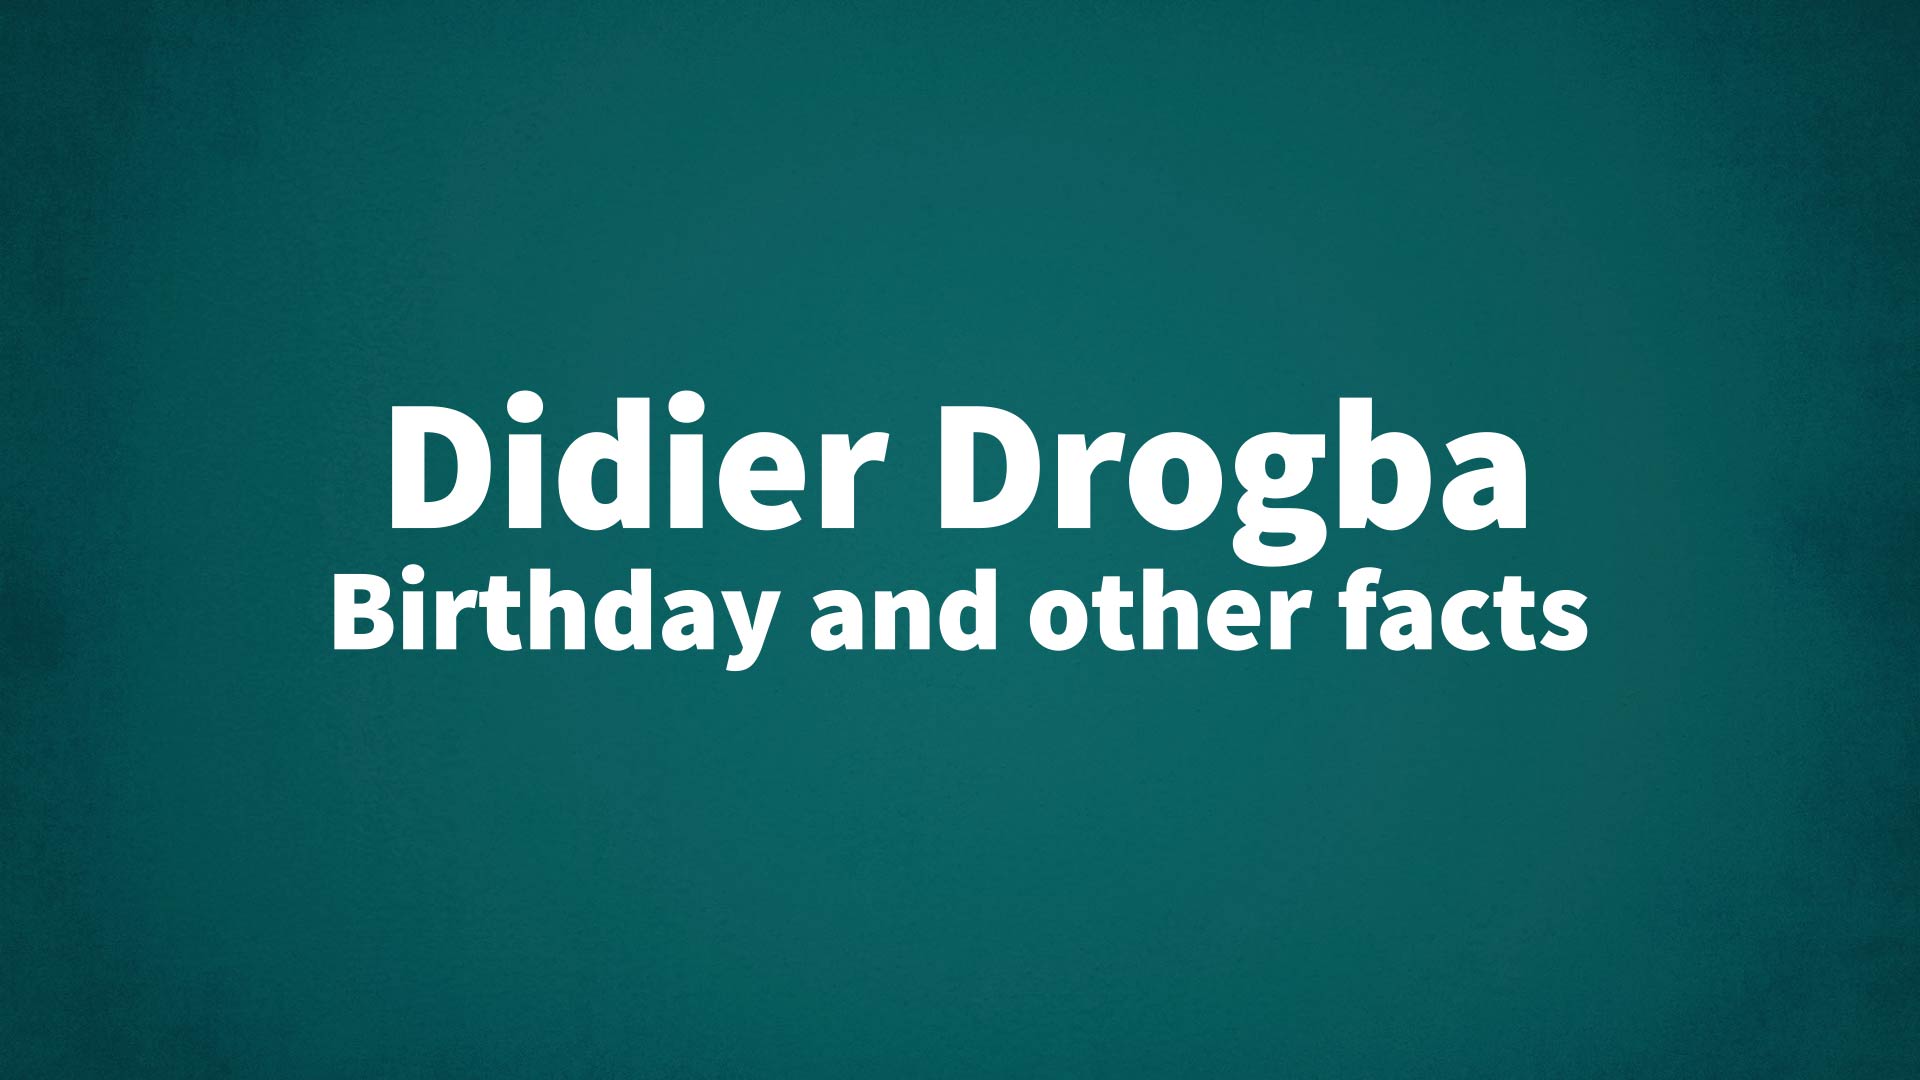 title image for Didier Drogba birthday